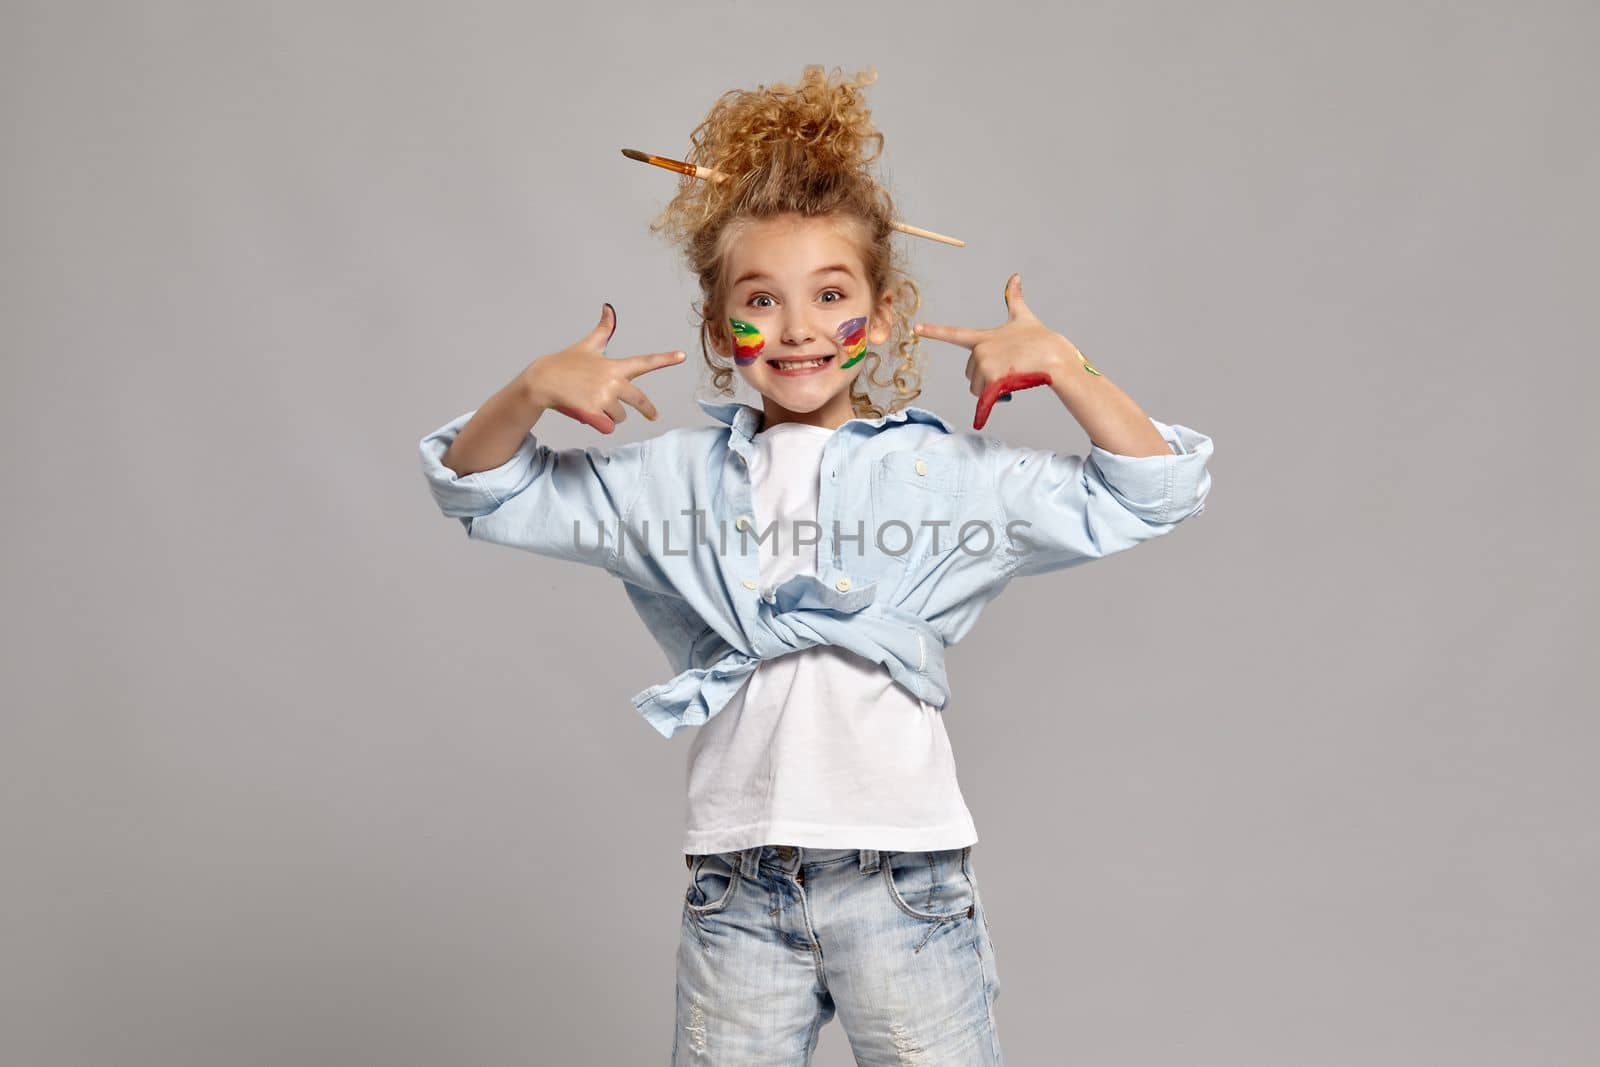 Lovely little lady having a brush in her chic curly blond hair, wearing in a blue shirt and white t-shirt. She has painted her cheeks and pointing on them, smiling at the camera on a gray background.